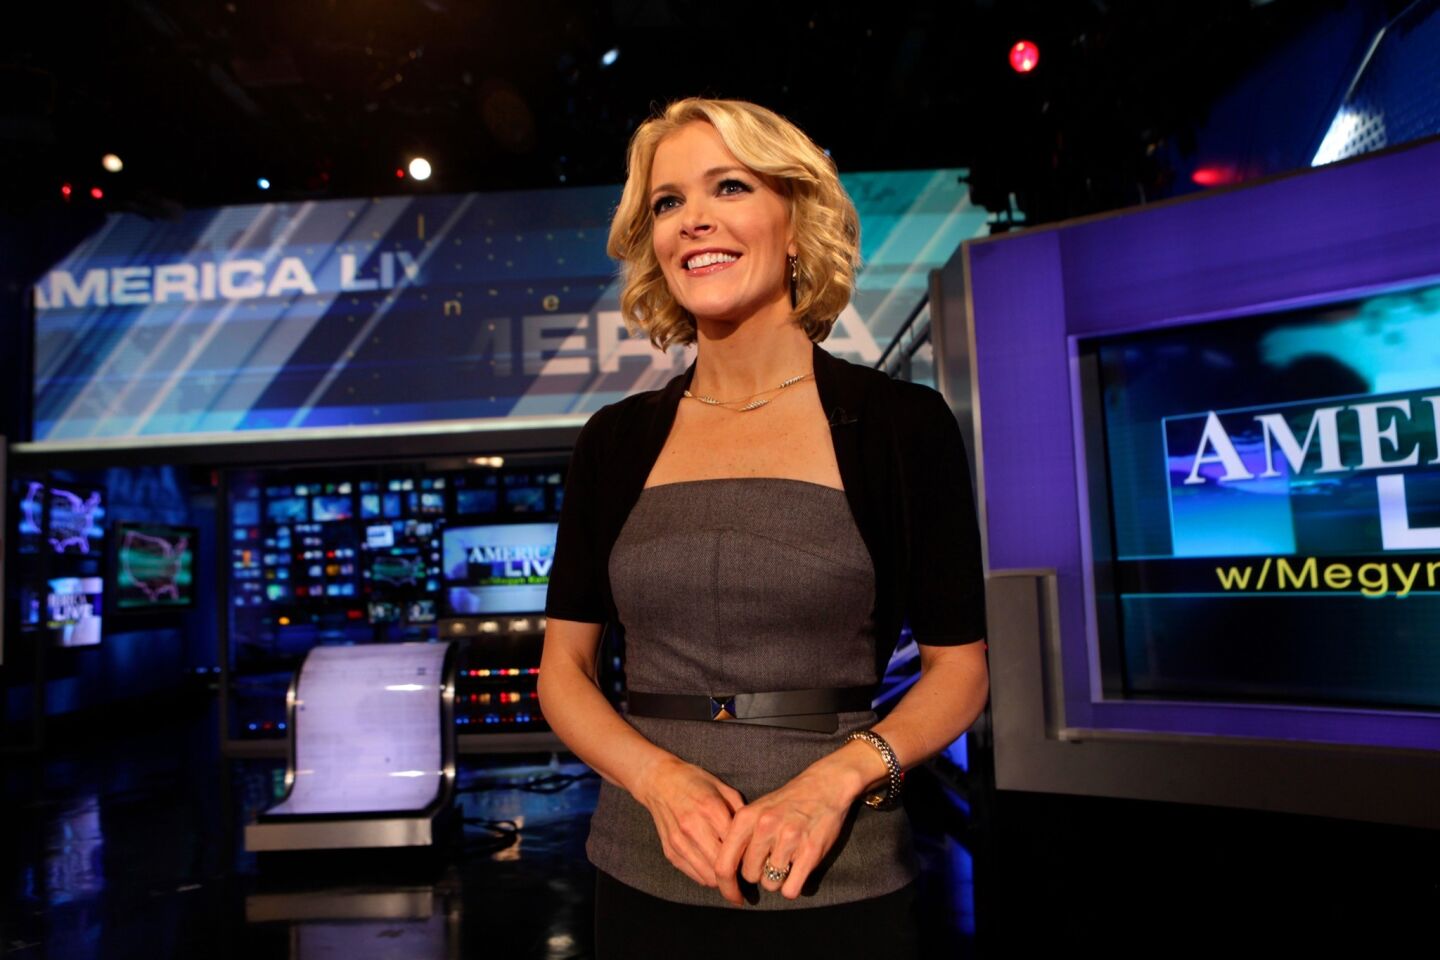 The Fox News Channel anchor Megyn Kelly and her husband Douglas Brunt welcomed their third baby on July 23, 2013. Thatcher Bray Brunt, who arrived at 8 pounds, 2 ounces, joins big brother Yates and big sis Yardley. MORE: Fox News' Megyn Kelly welcomes baby No. 3, a boy named Thatcher